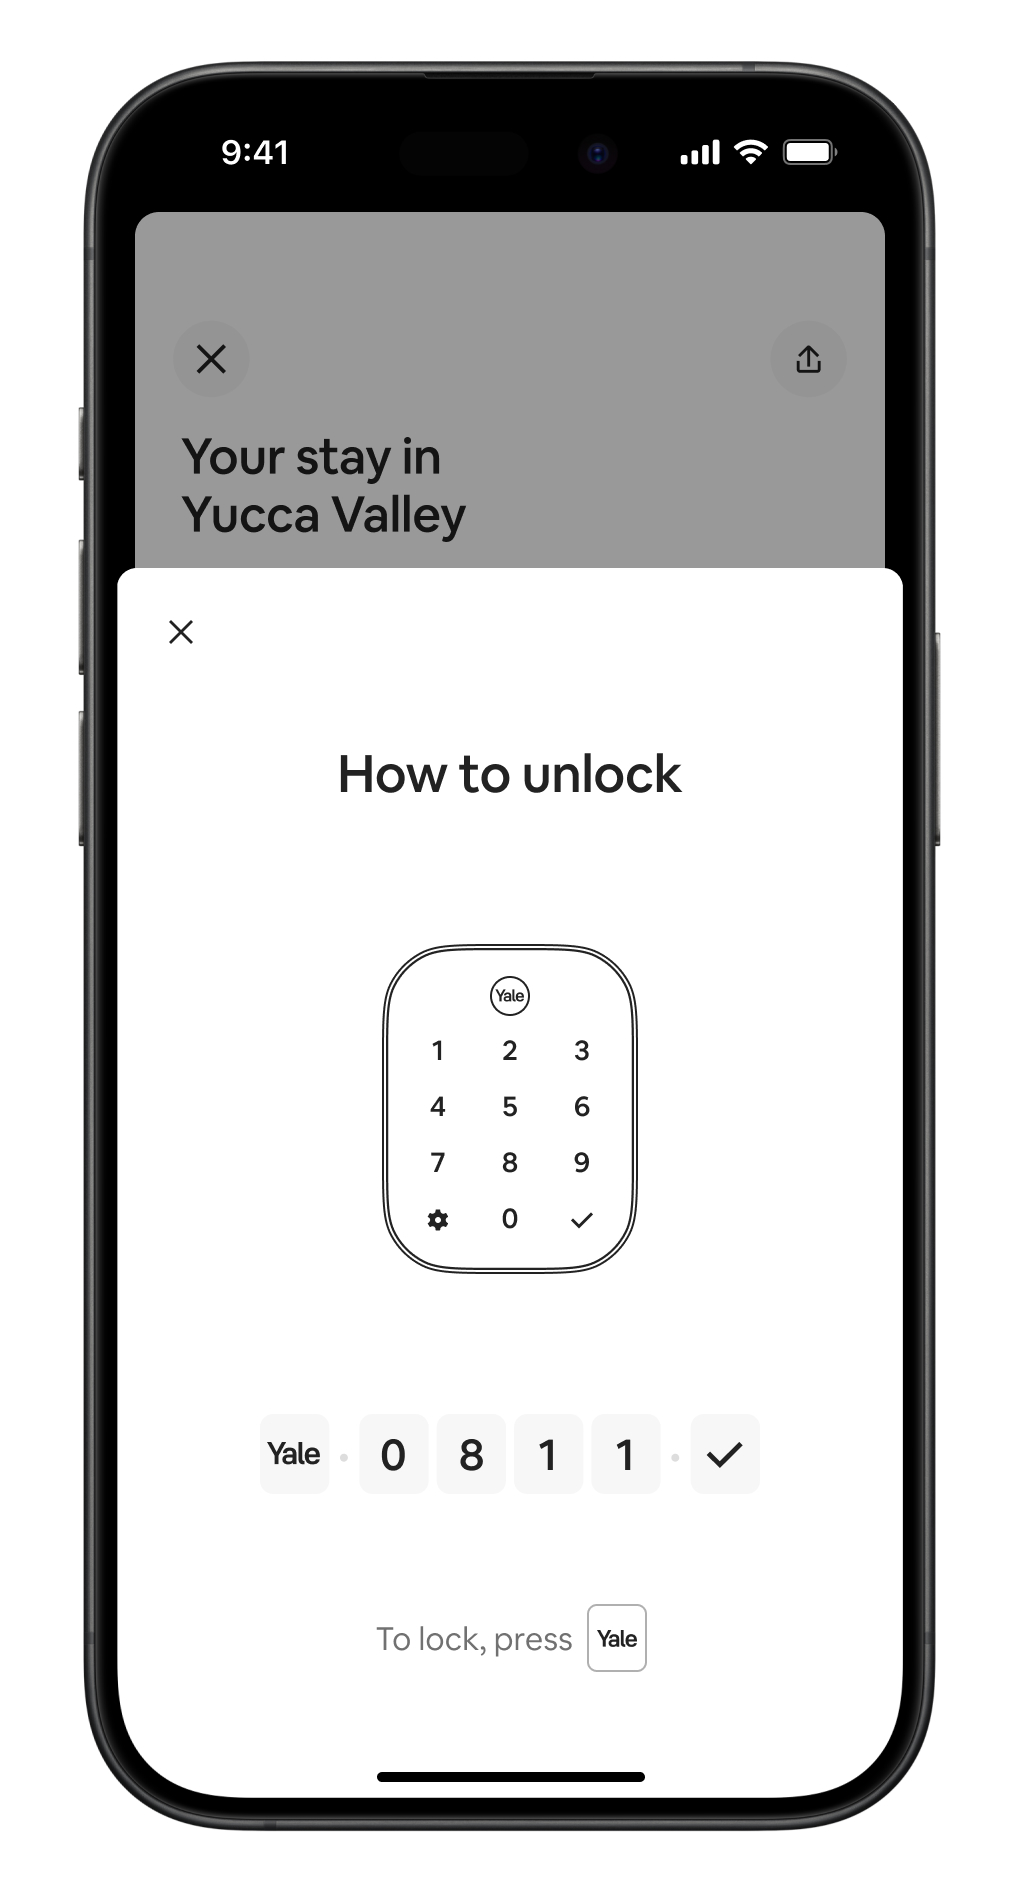 Phone screen with instructions for unlocking a Yale lock.